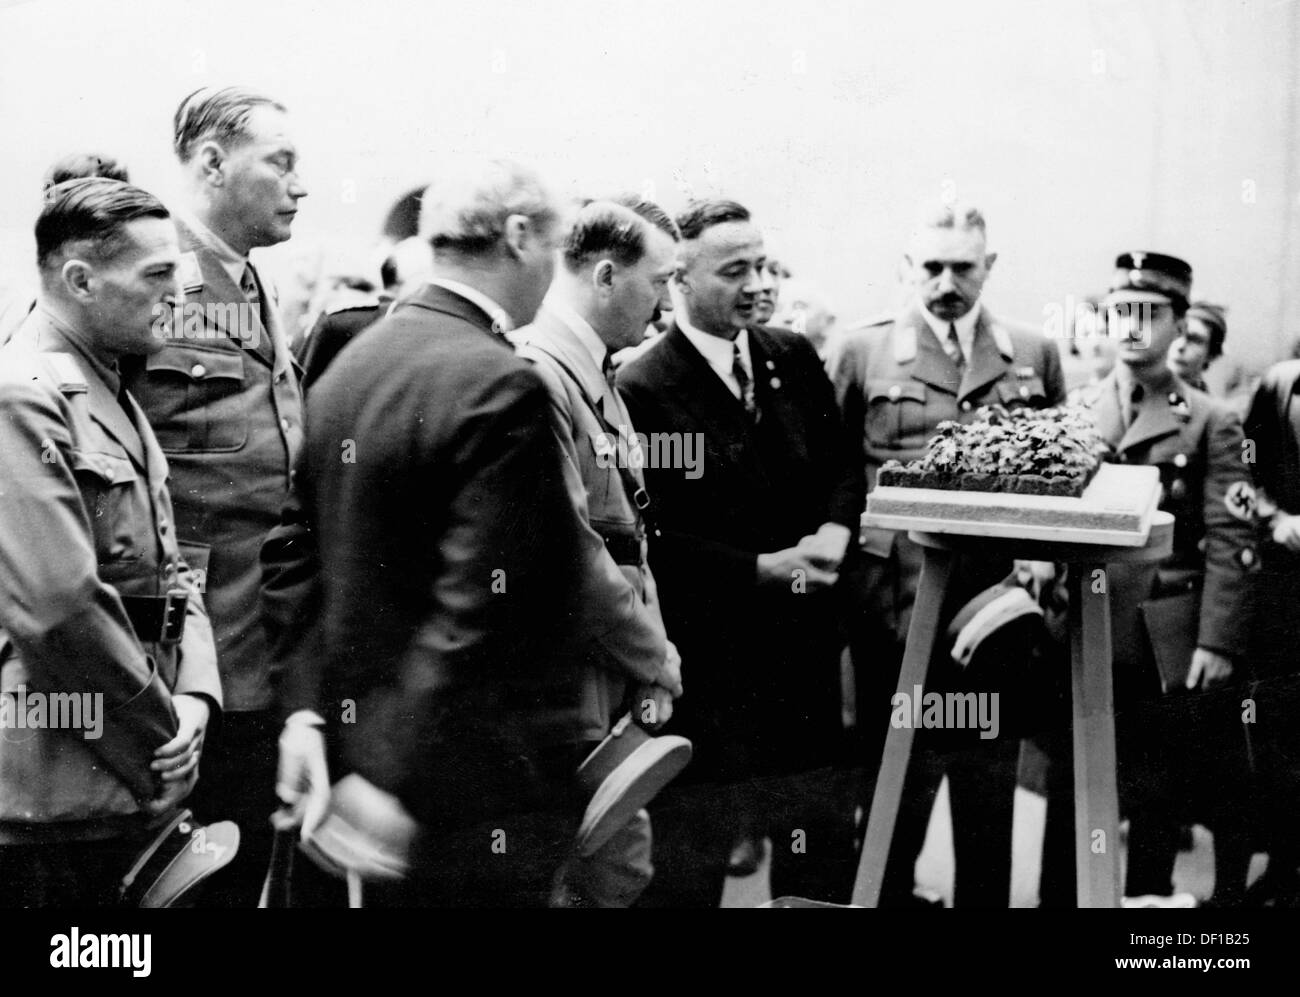 The image from the Nazi Propaganda! shows Adolf Hitler during his visit to the exhibition of the the German War Graves Commission in the city hall of Dresden, Germany, in 1934. Fotoarchiv für Zeitgeschichte Stock Photo